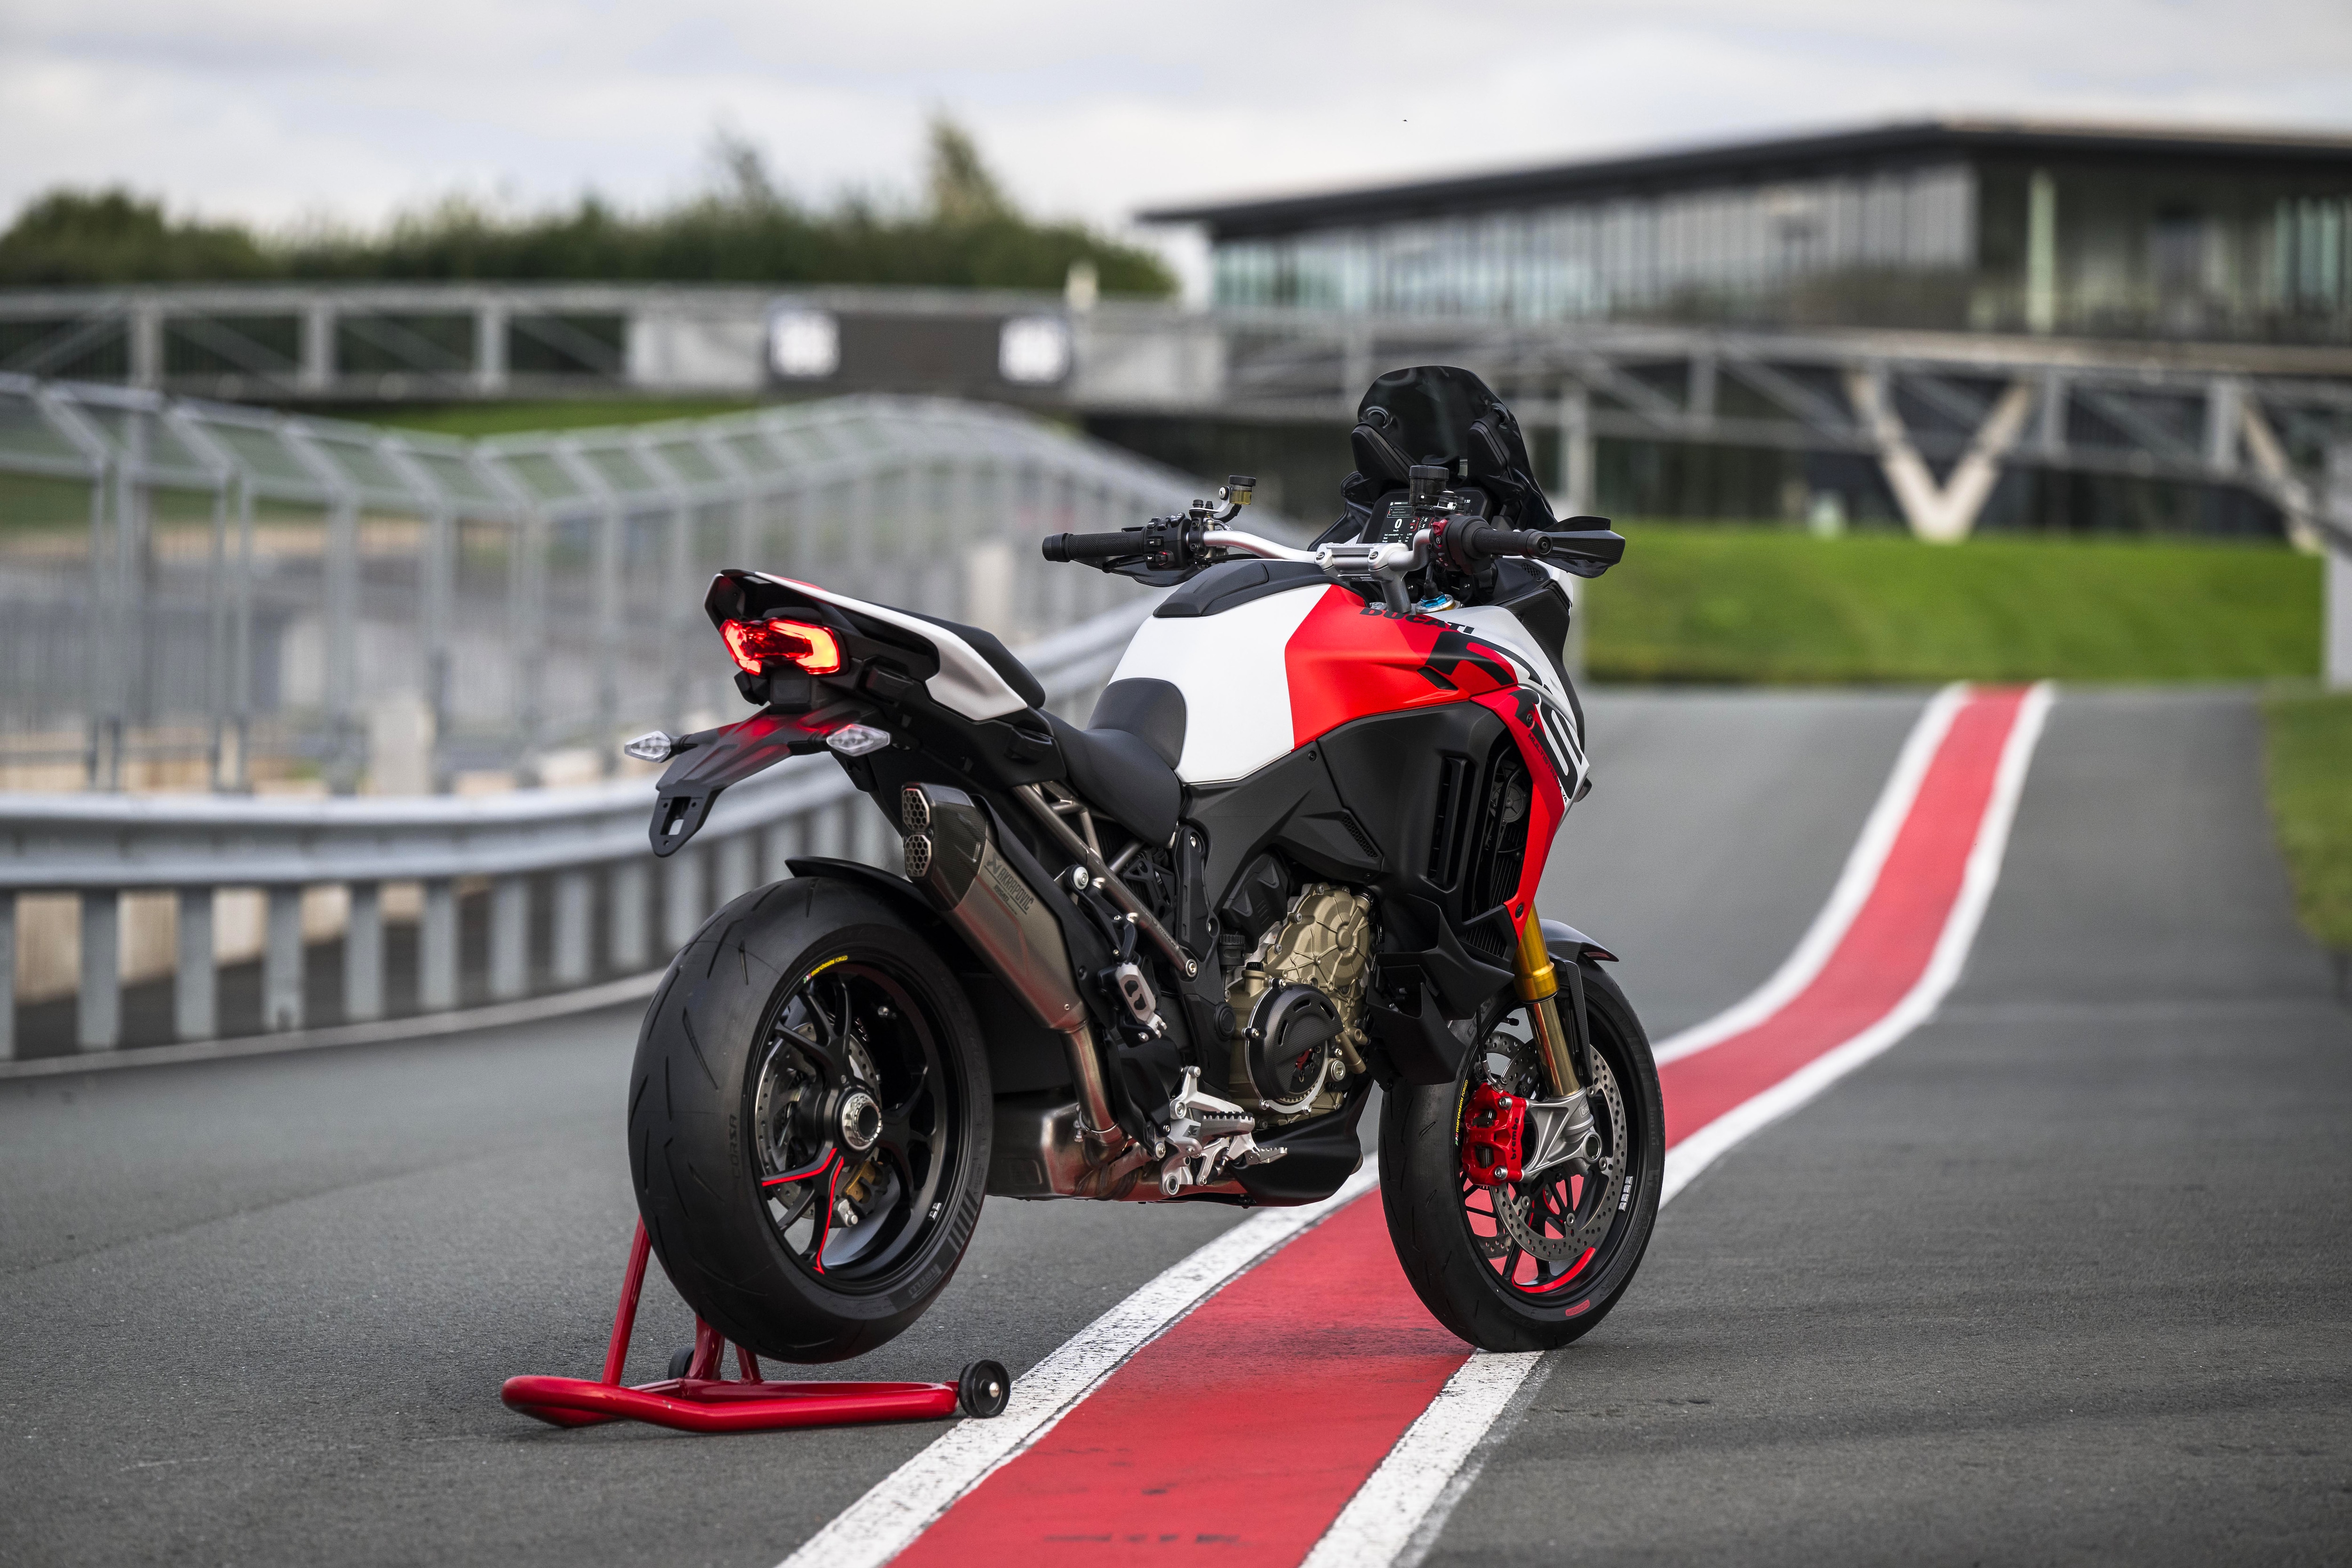 Ducati Multistrada V4 RS parked up at a track